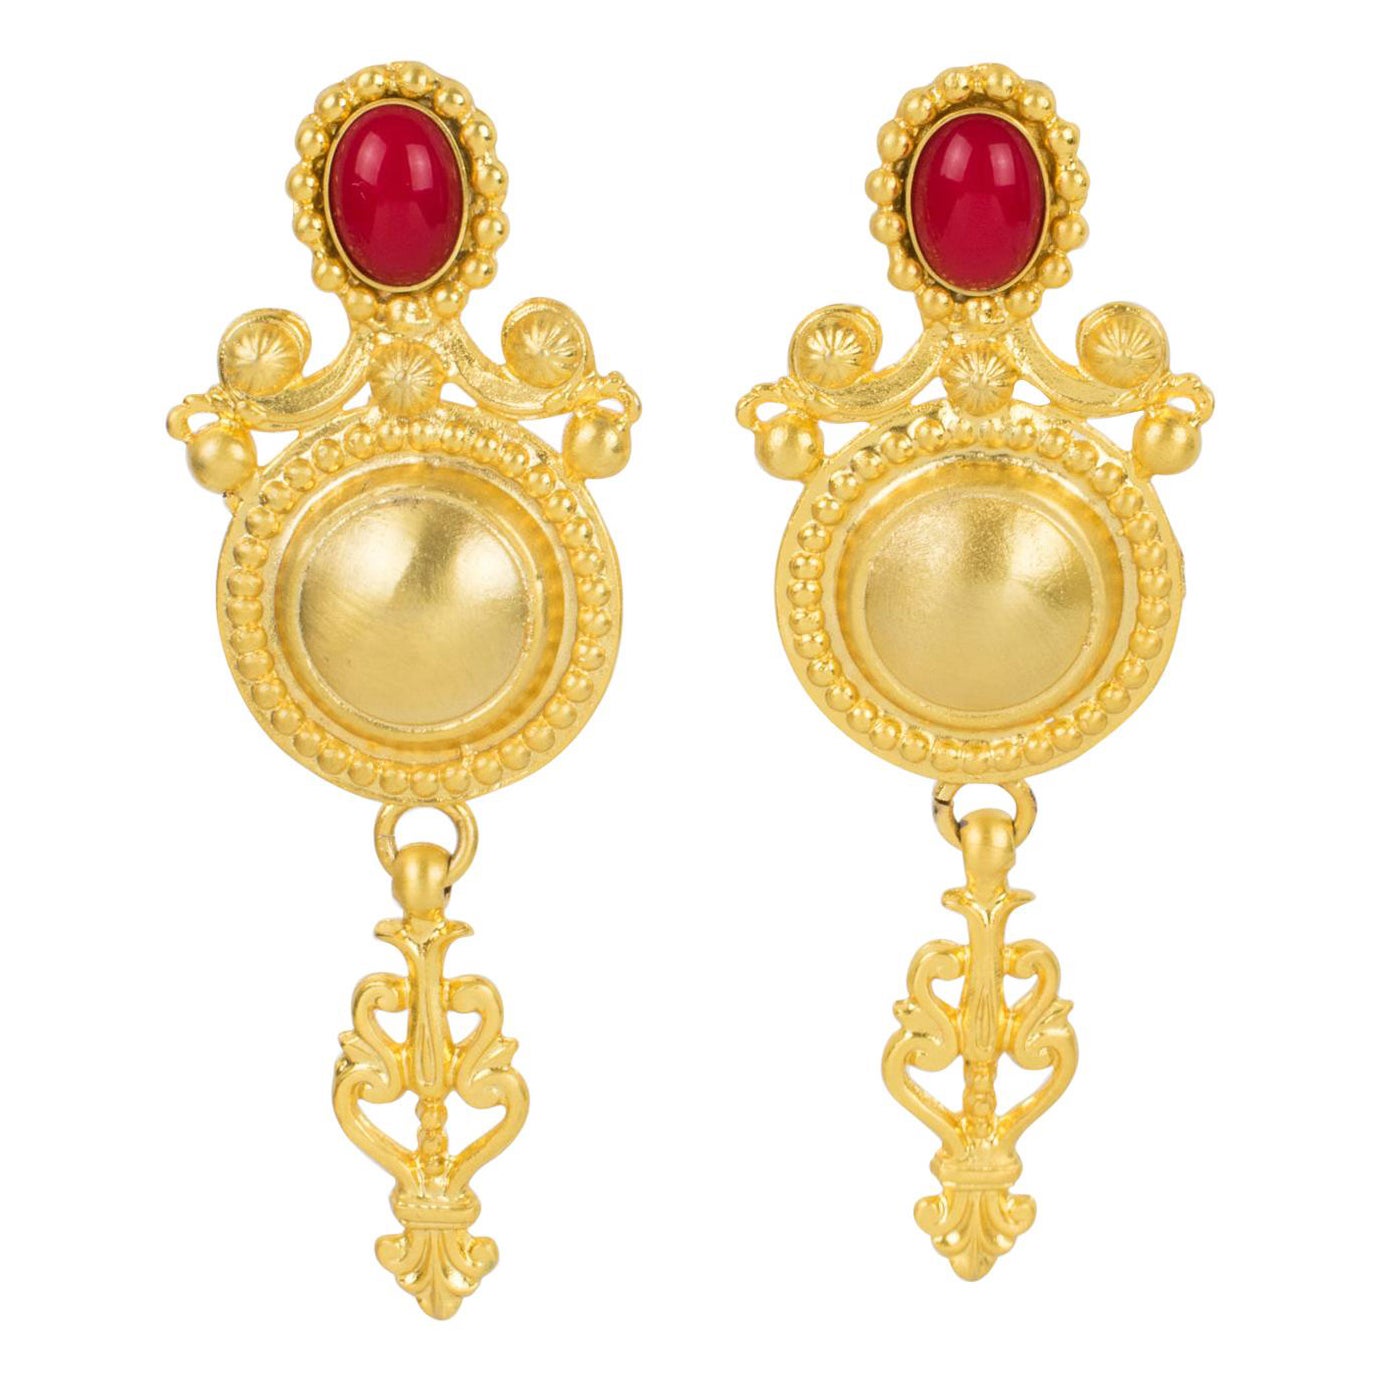 Gianfranco Ferre Gilt Metal Baroque Clip Earrings with Red Cabochon For Sale